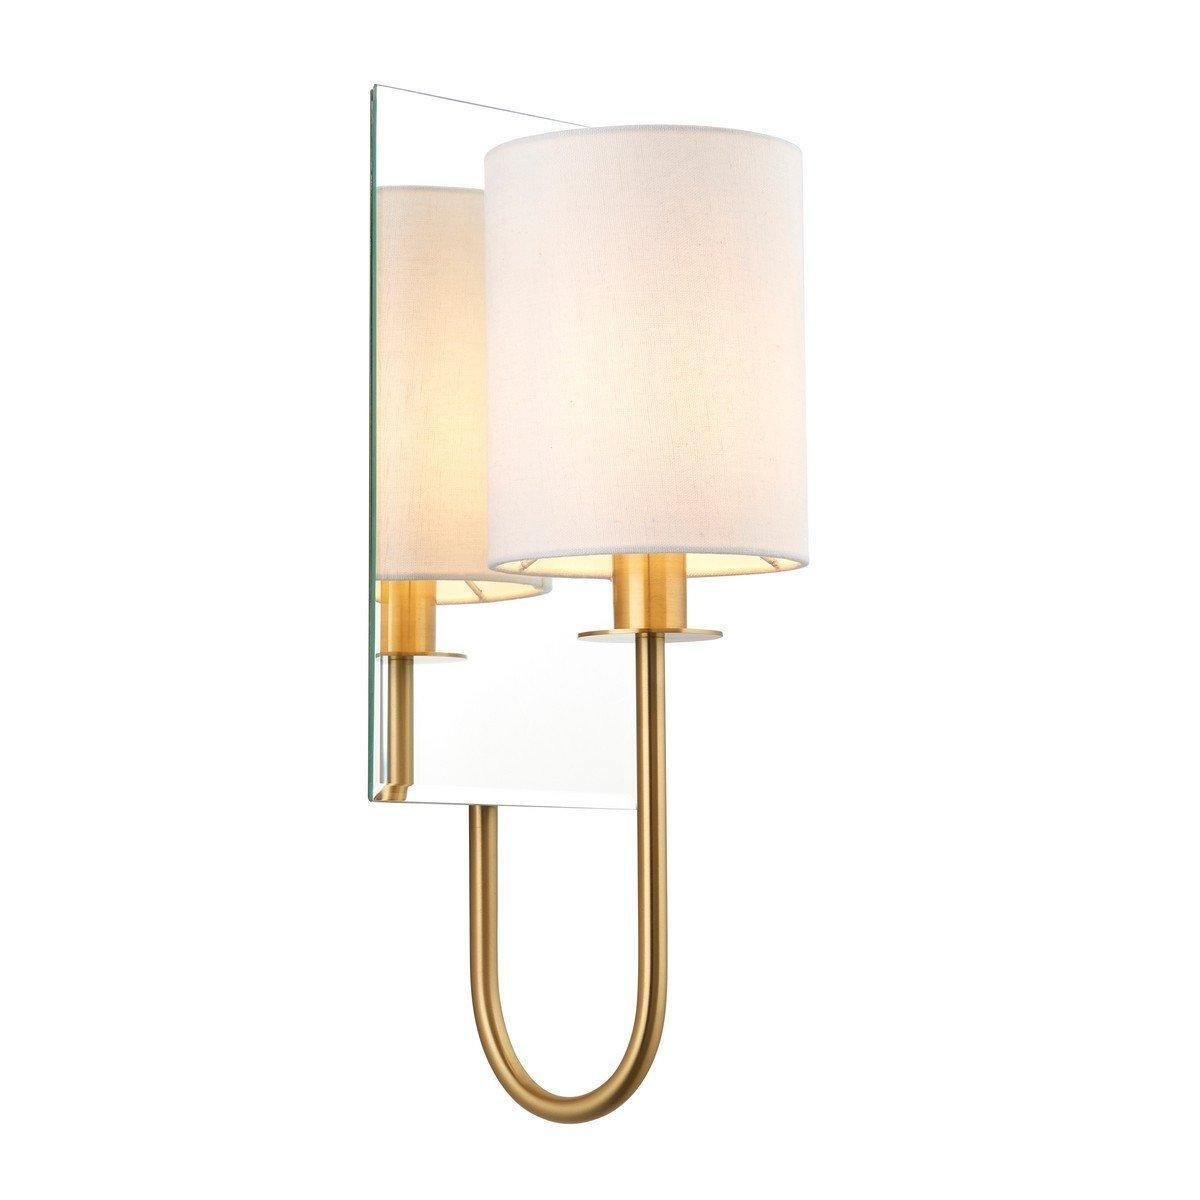 'PISA' Dimmable Stylish Contemporary Indoor Decorative Shade Wall Lamp - image 1